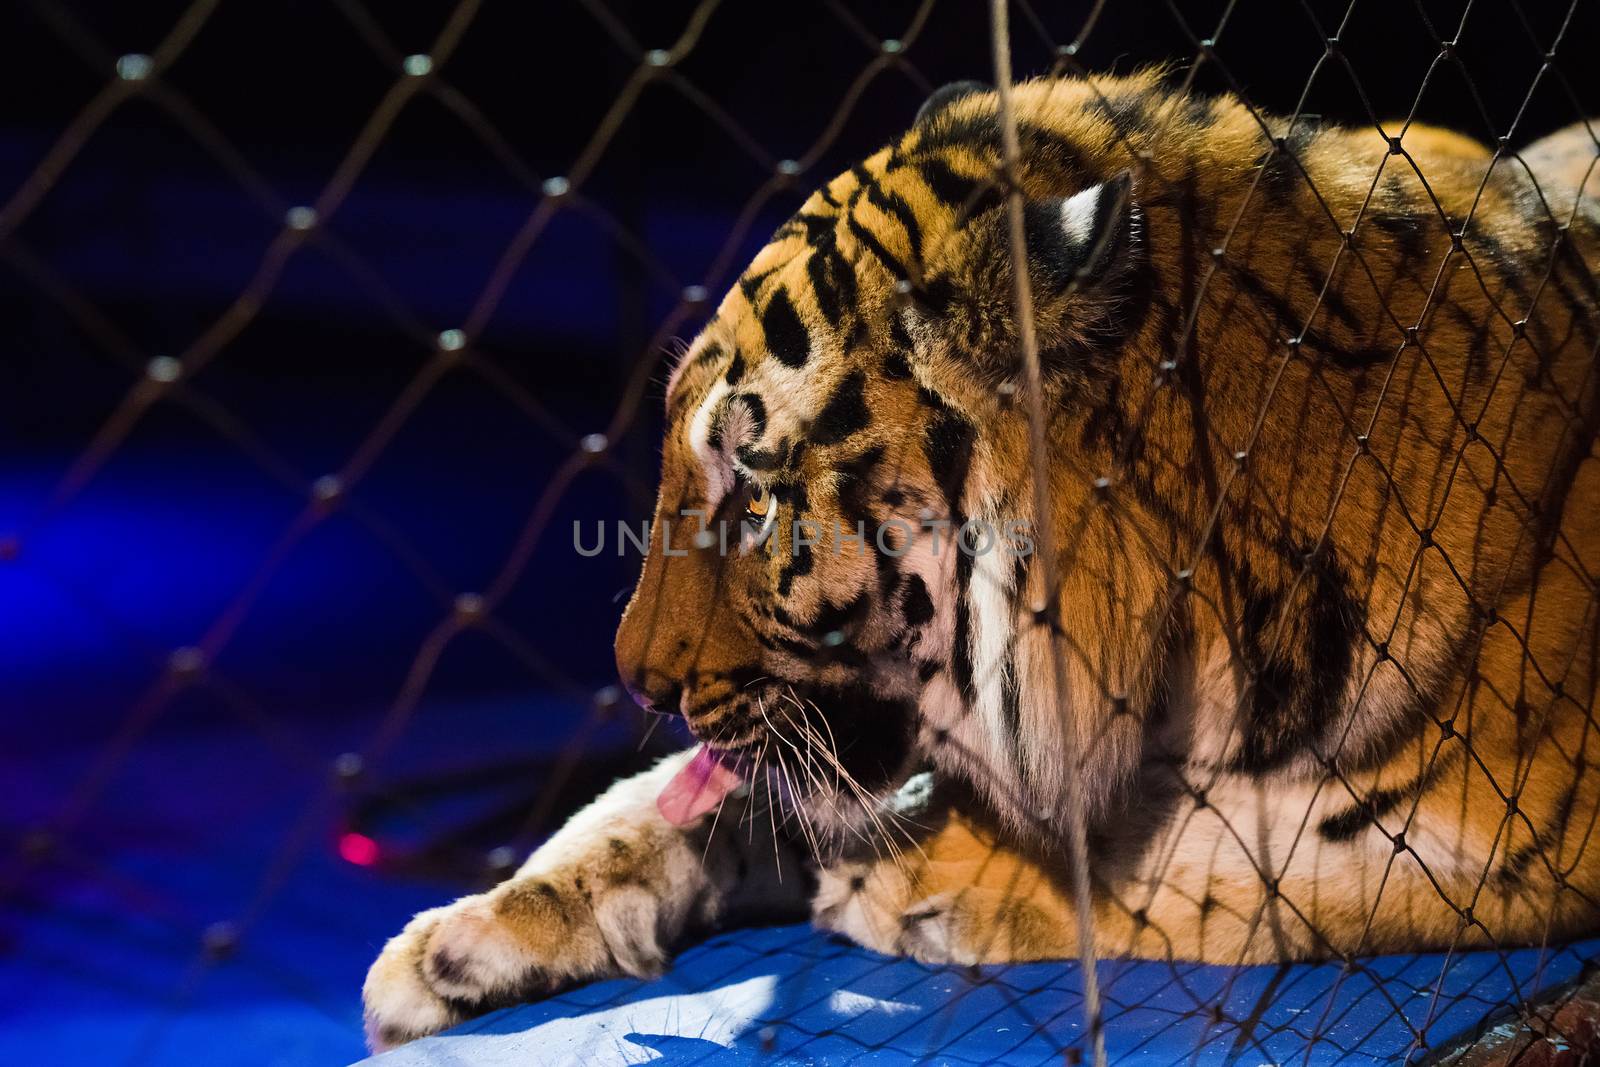 Tiger performs tricks in the circus arena by grigorenko